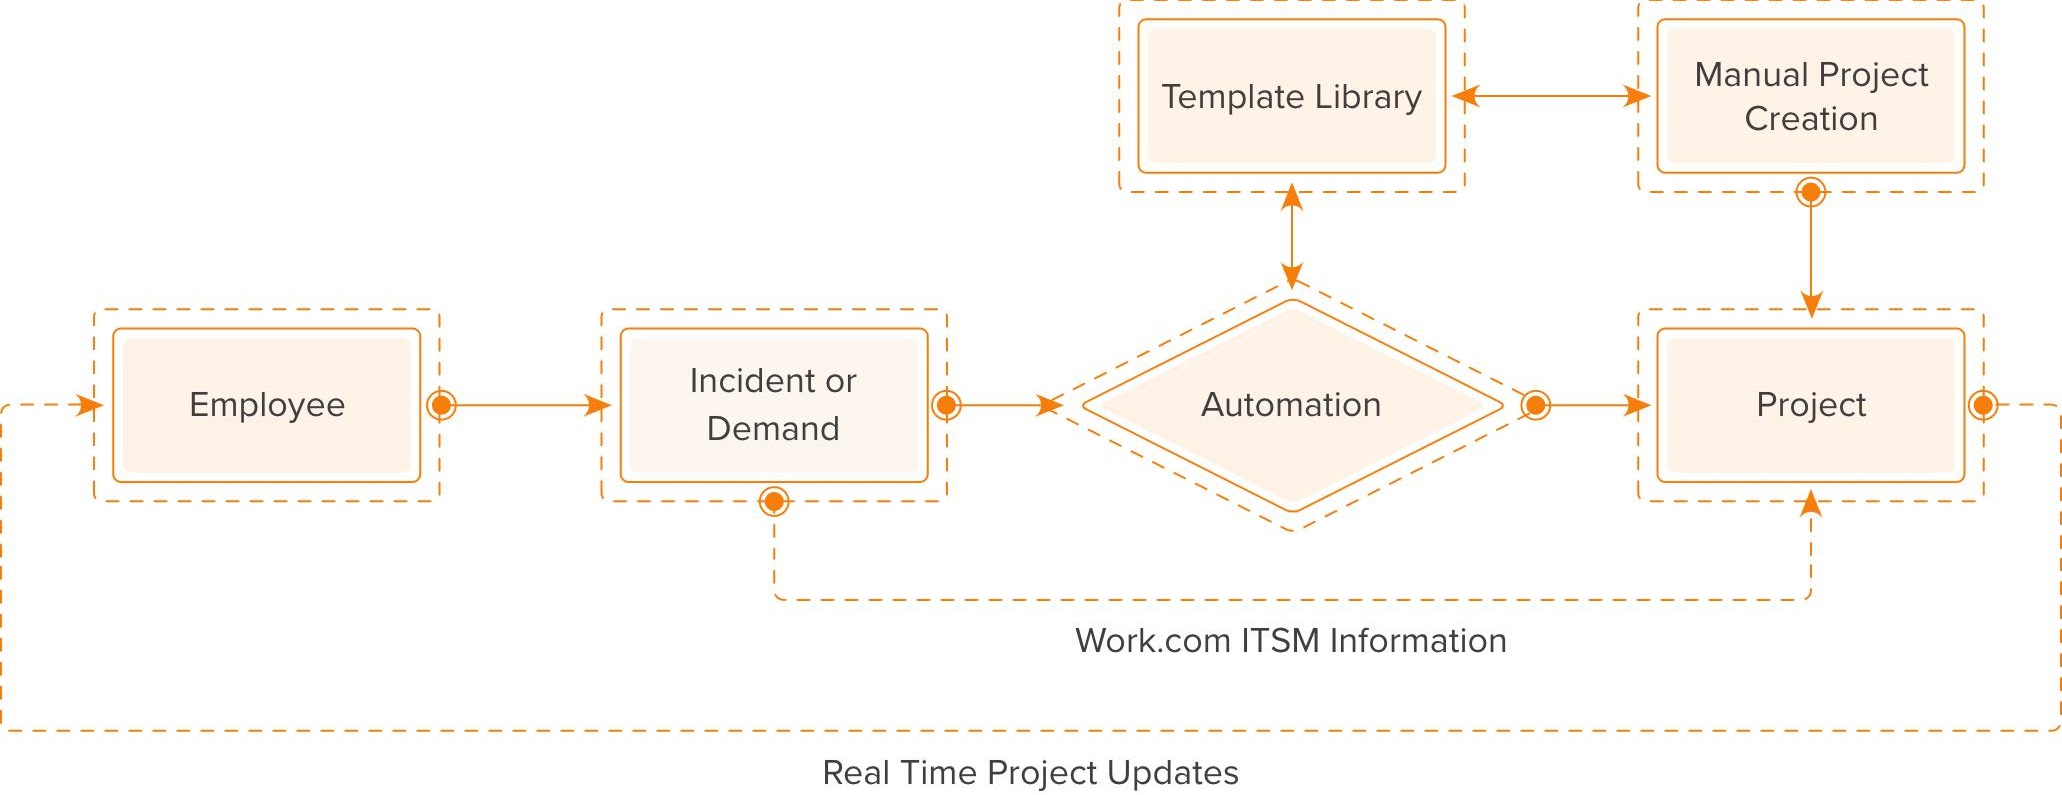 Create Projects from your Incidents & ITSM/C records